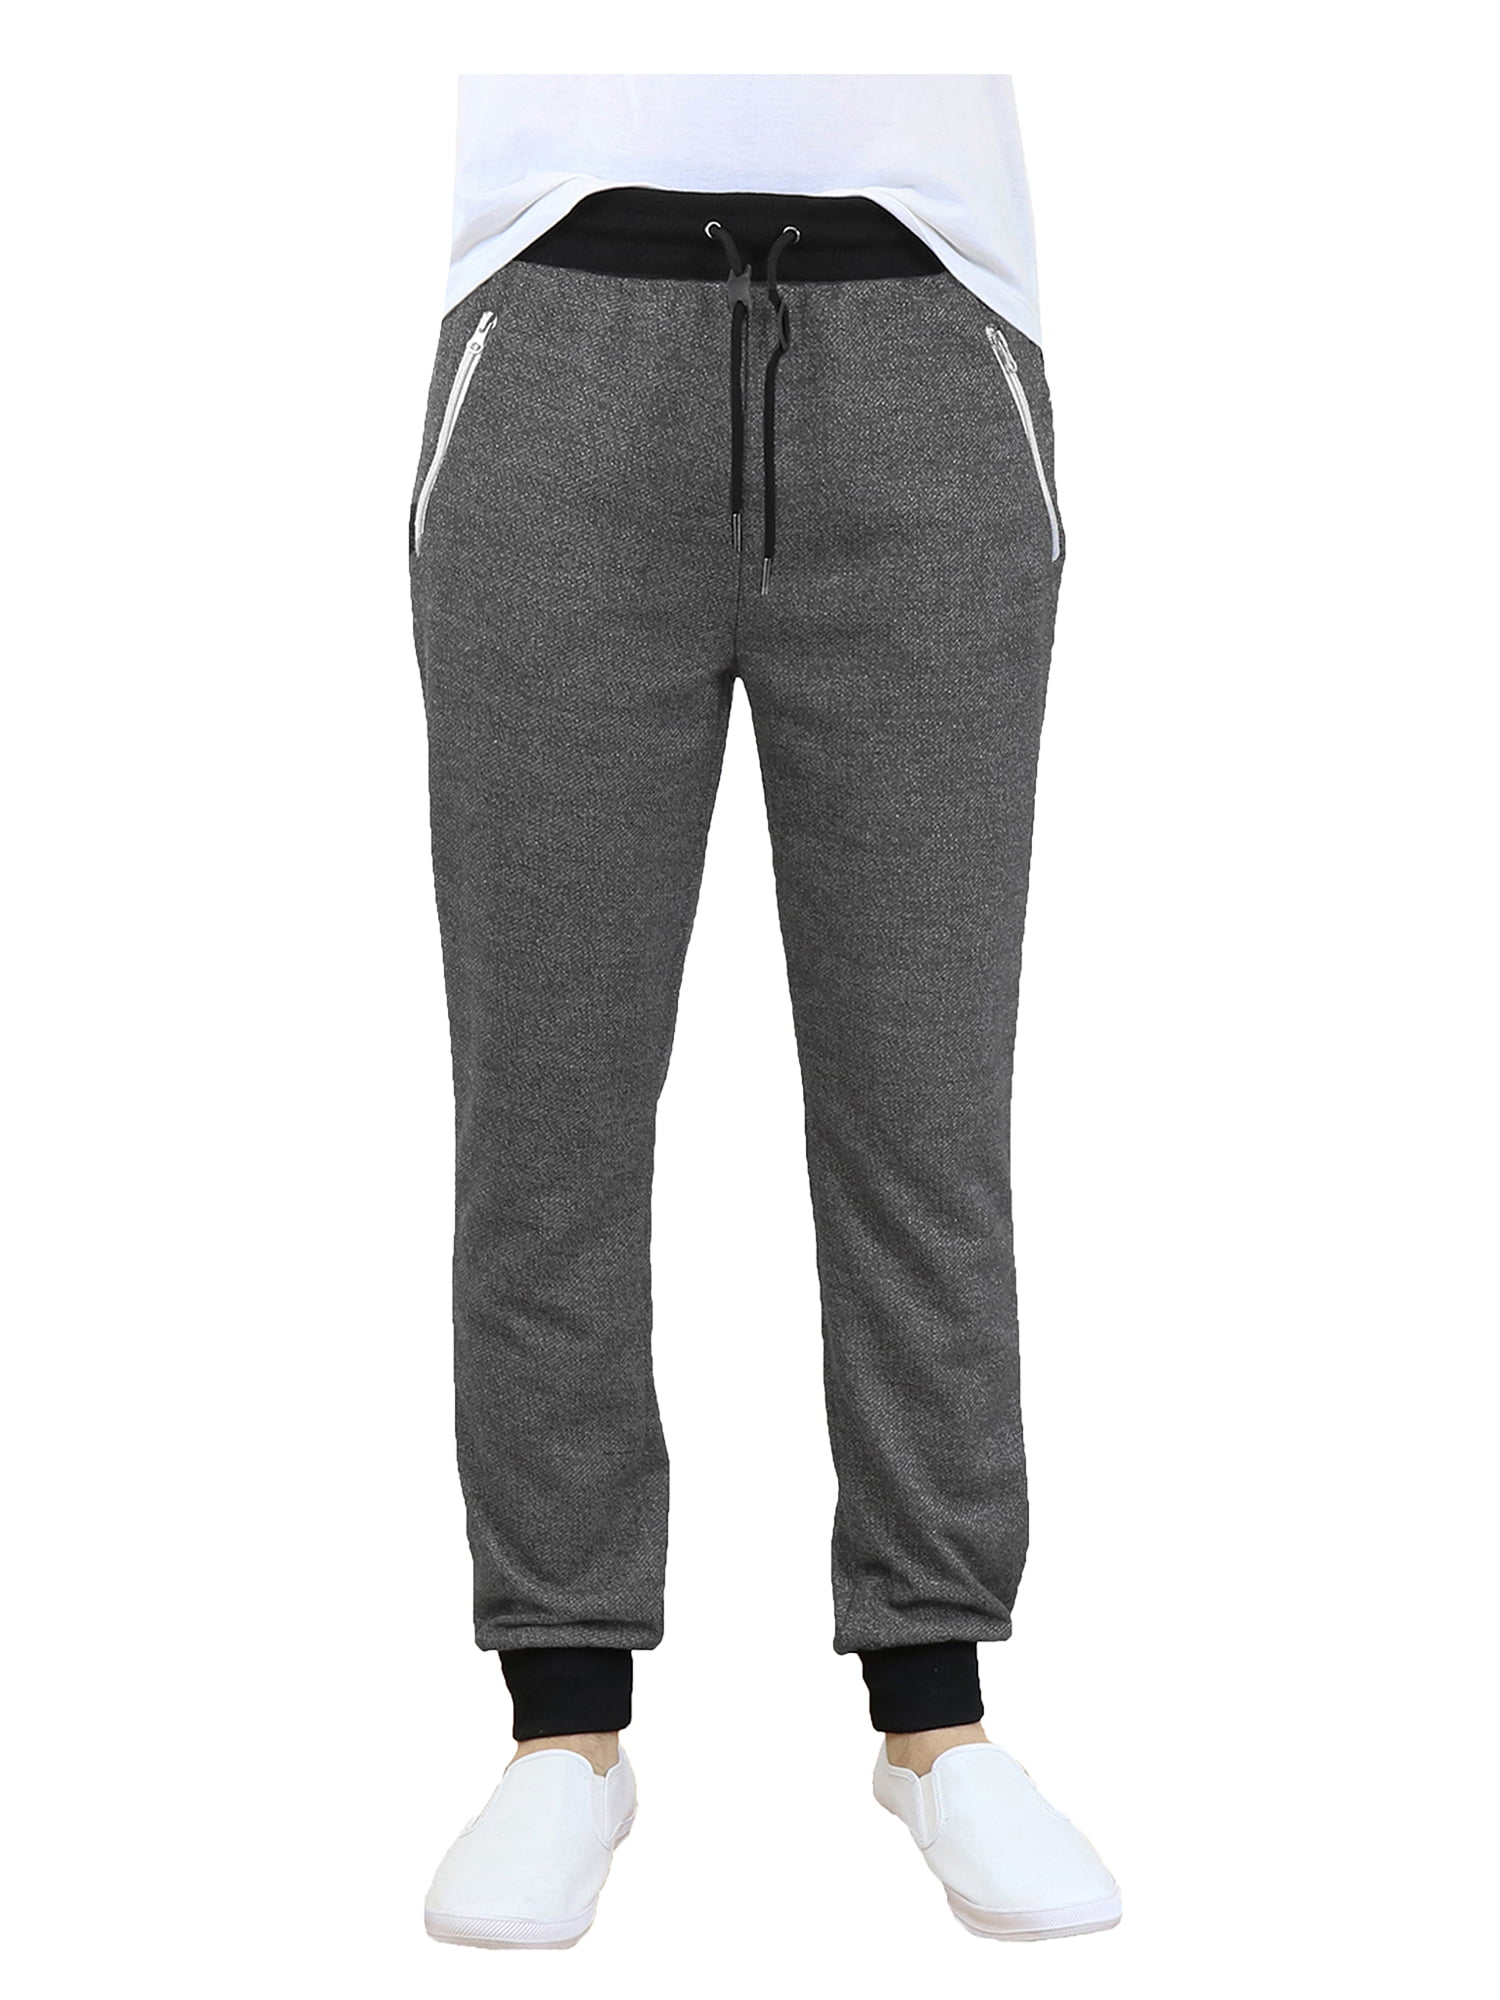 Men's French-Terry Slim-Fit Joggers with Zipper Pockets 